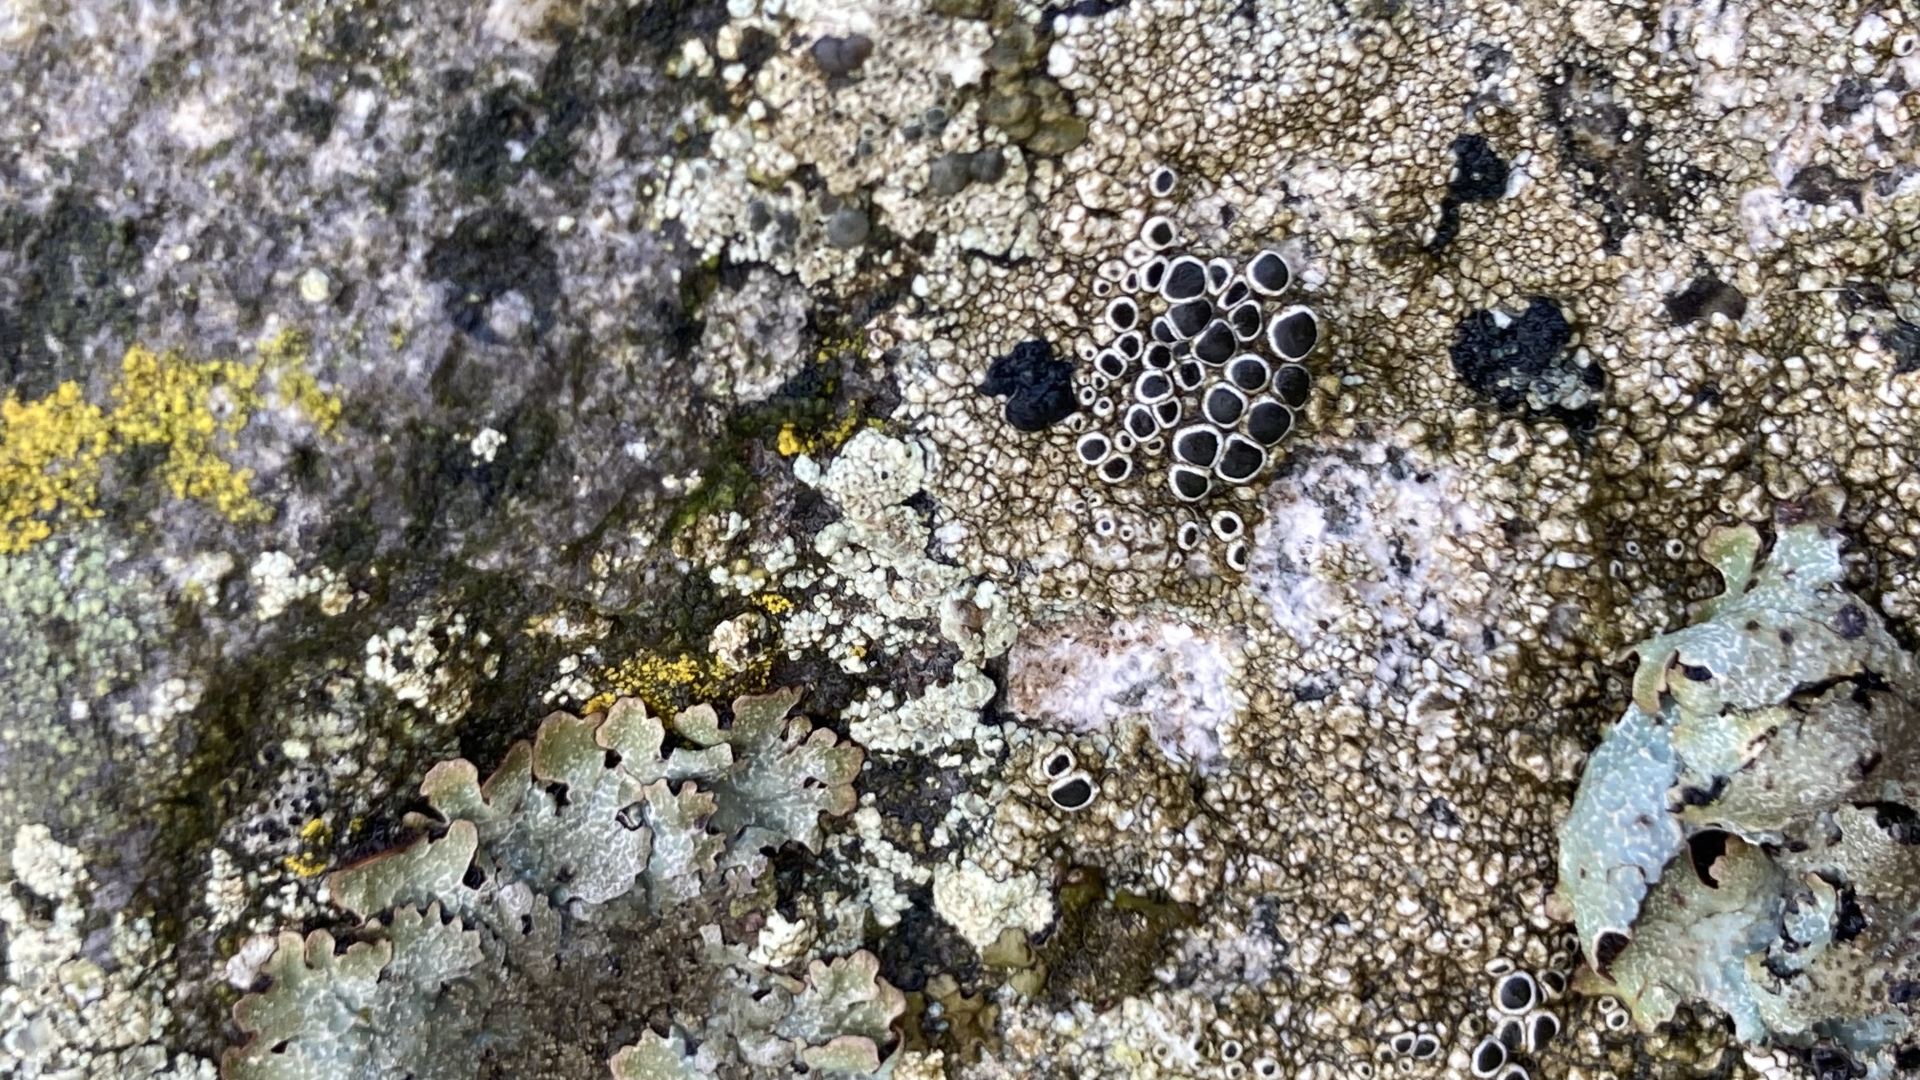 A still of coral on a rock.